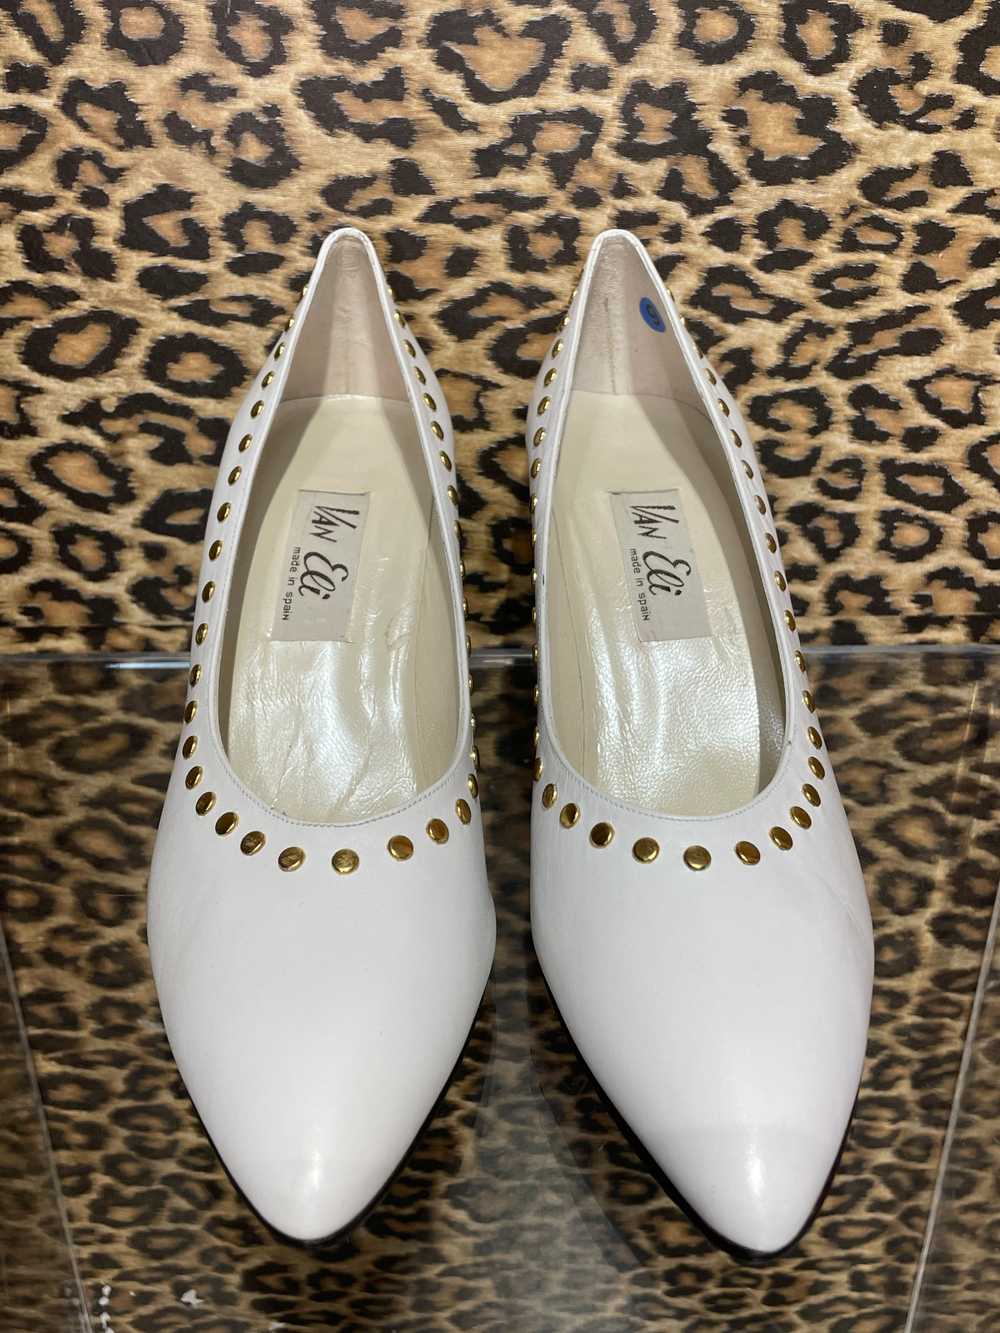 1980’s White Studded Pumps - image 3